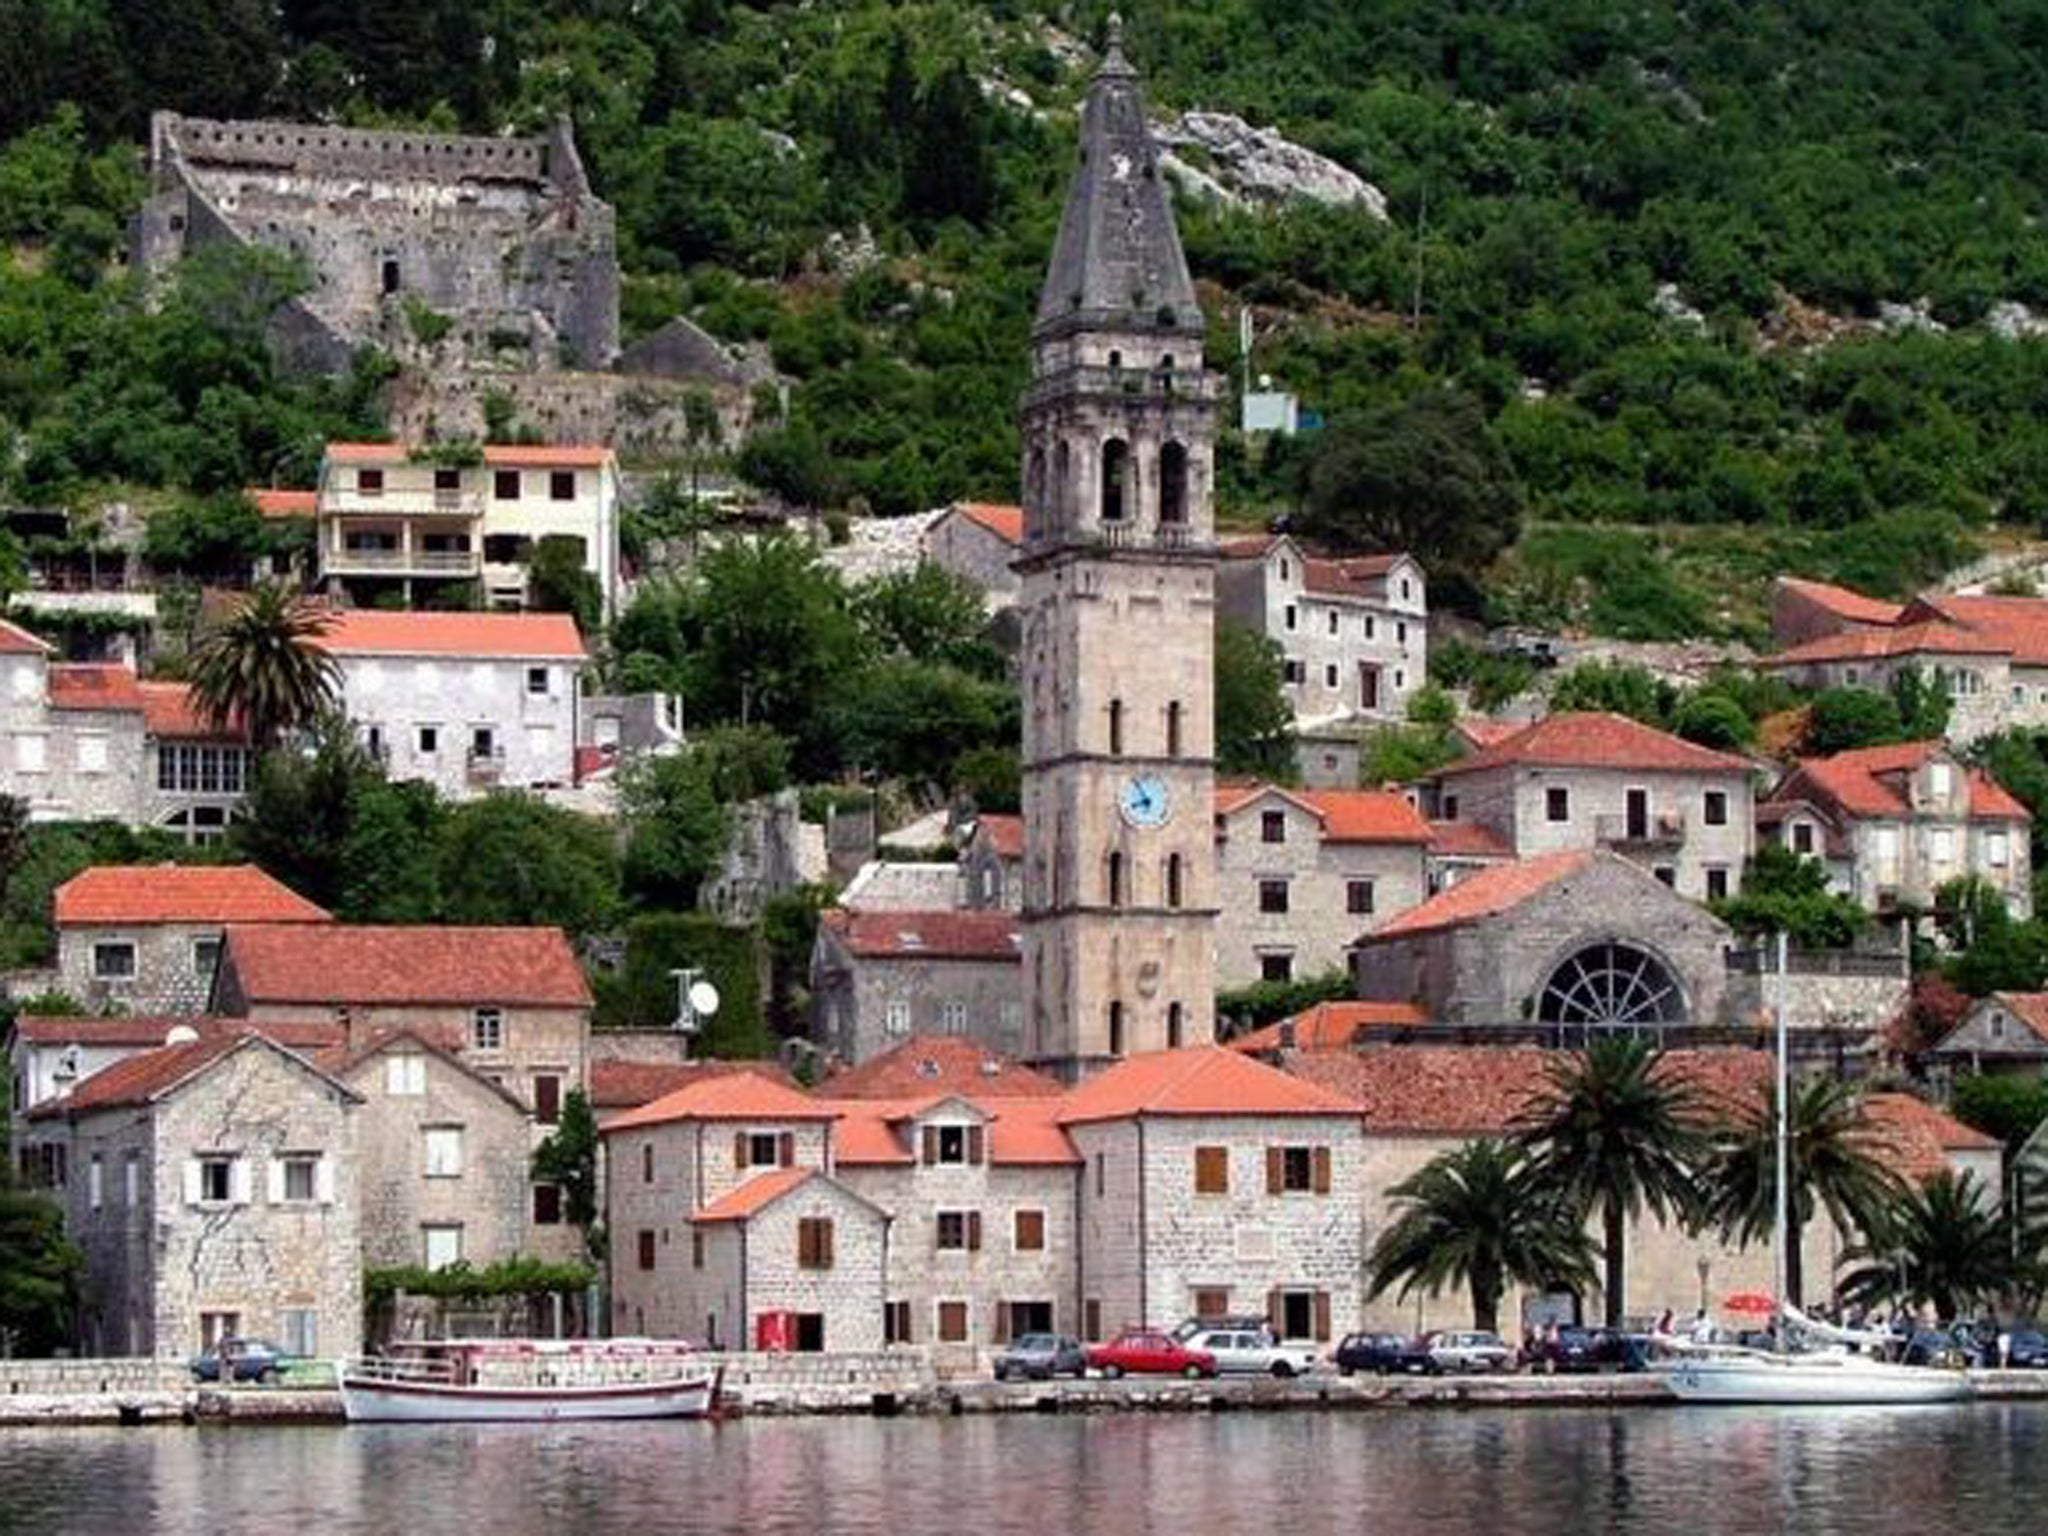 Montenegro is predicted to have the world's fastest growing tourism industry in the next 10 years